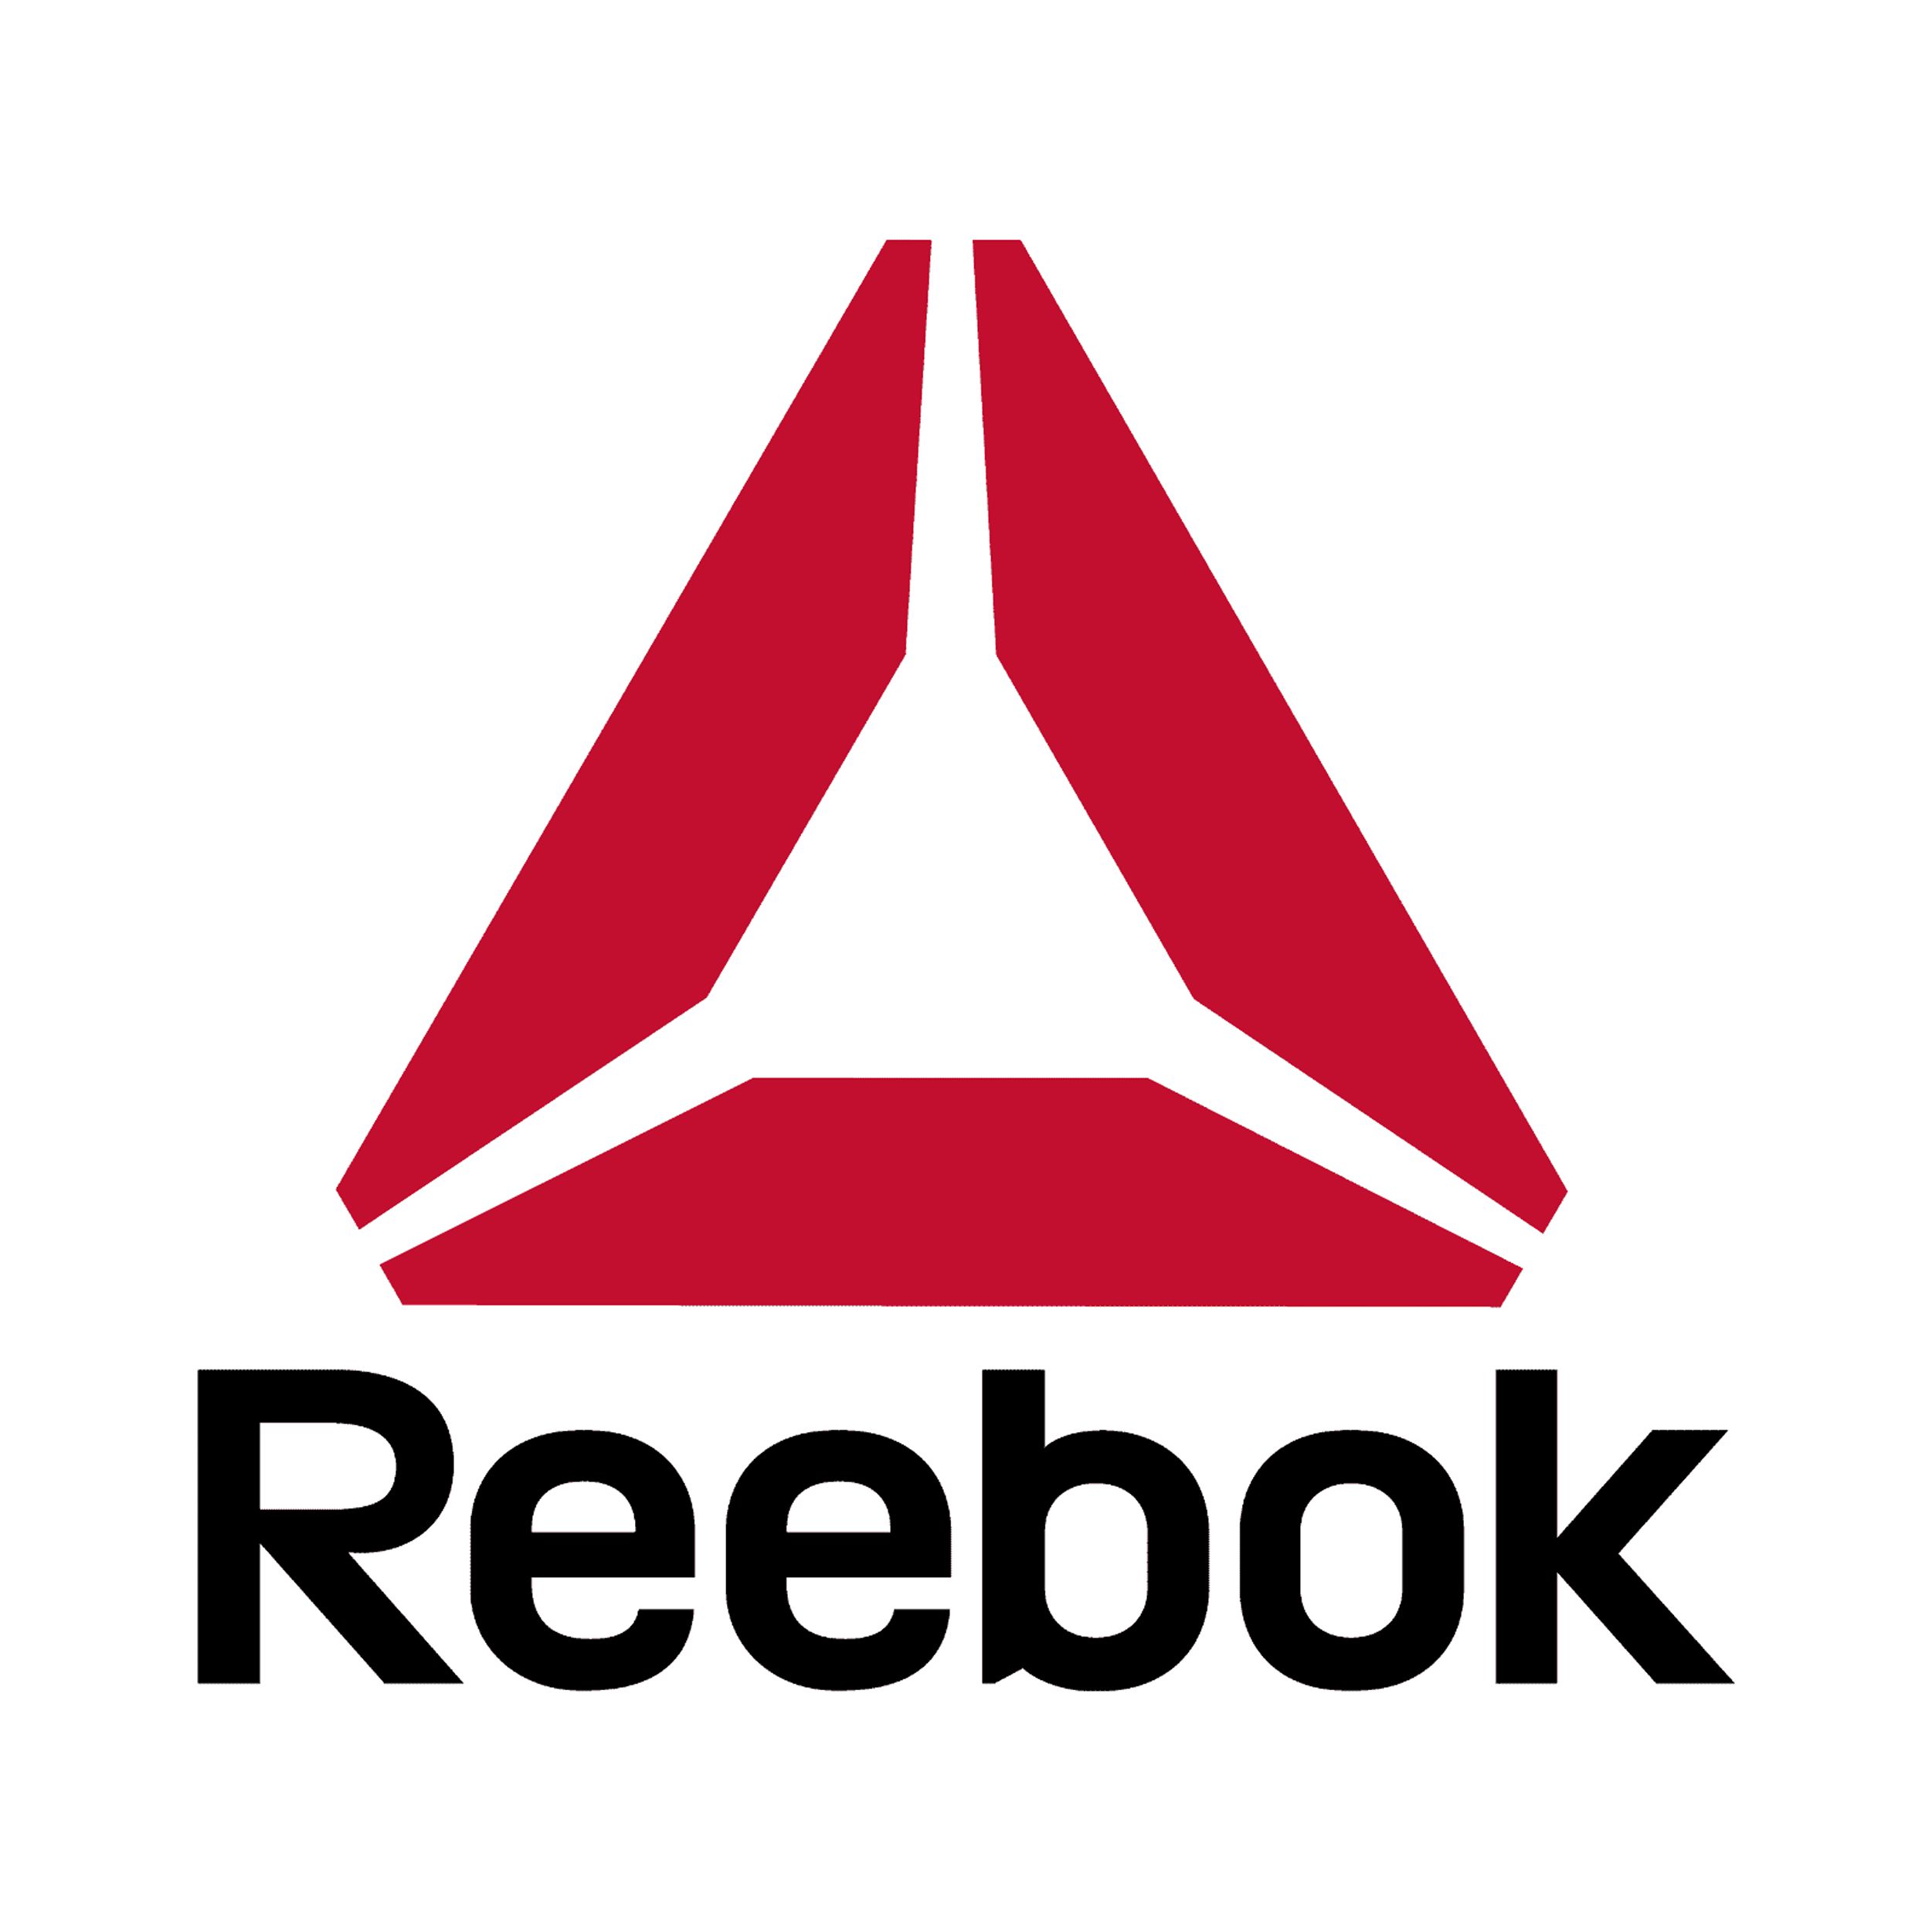 Reebok Boys Performance Boxer Briefs, 5-Pack - image 4 of 4